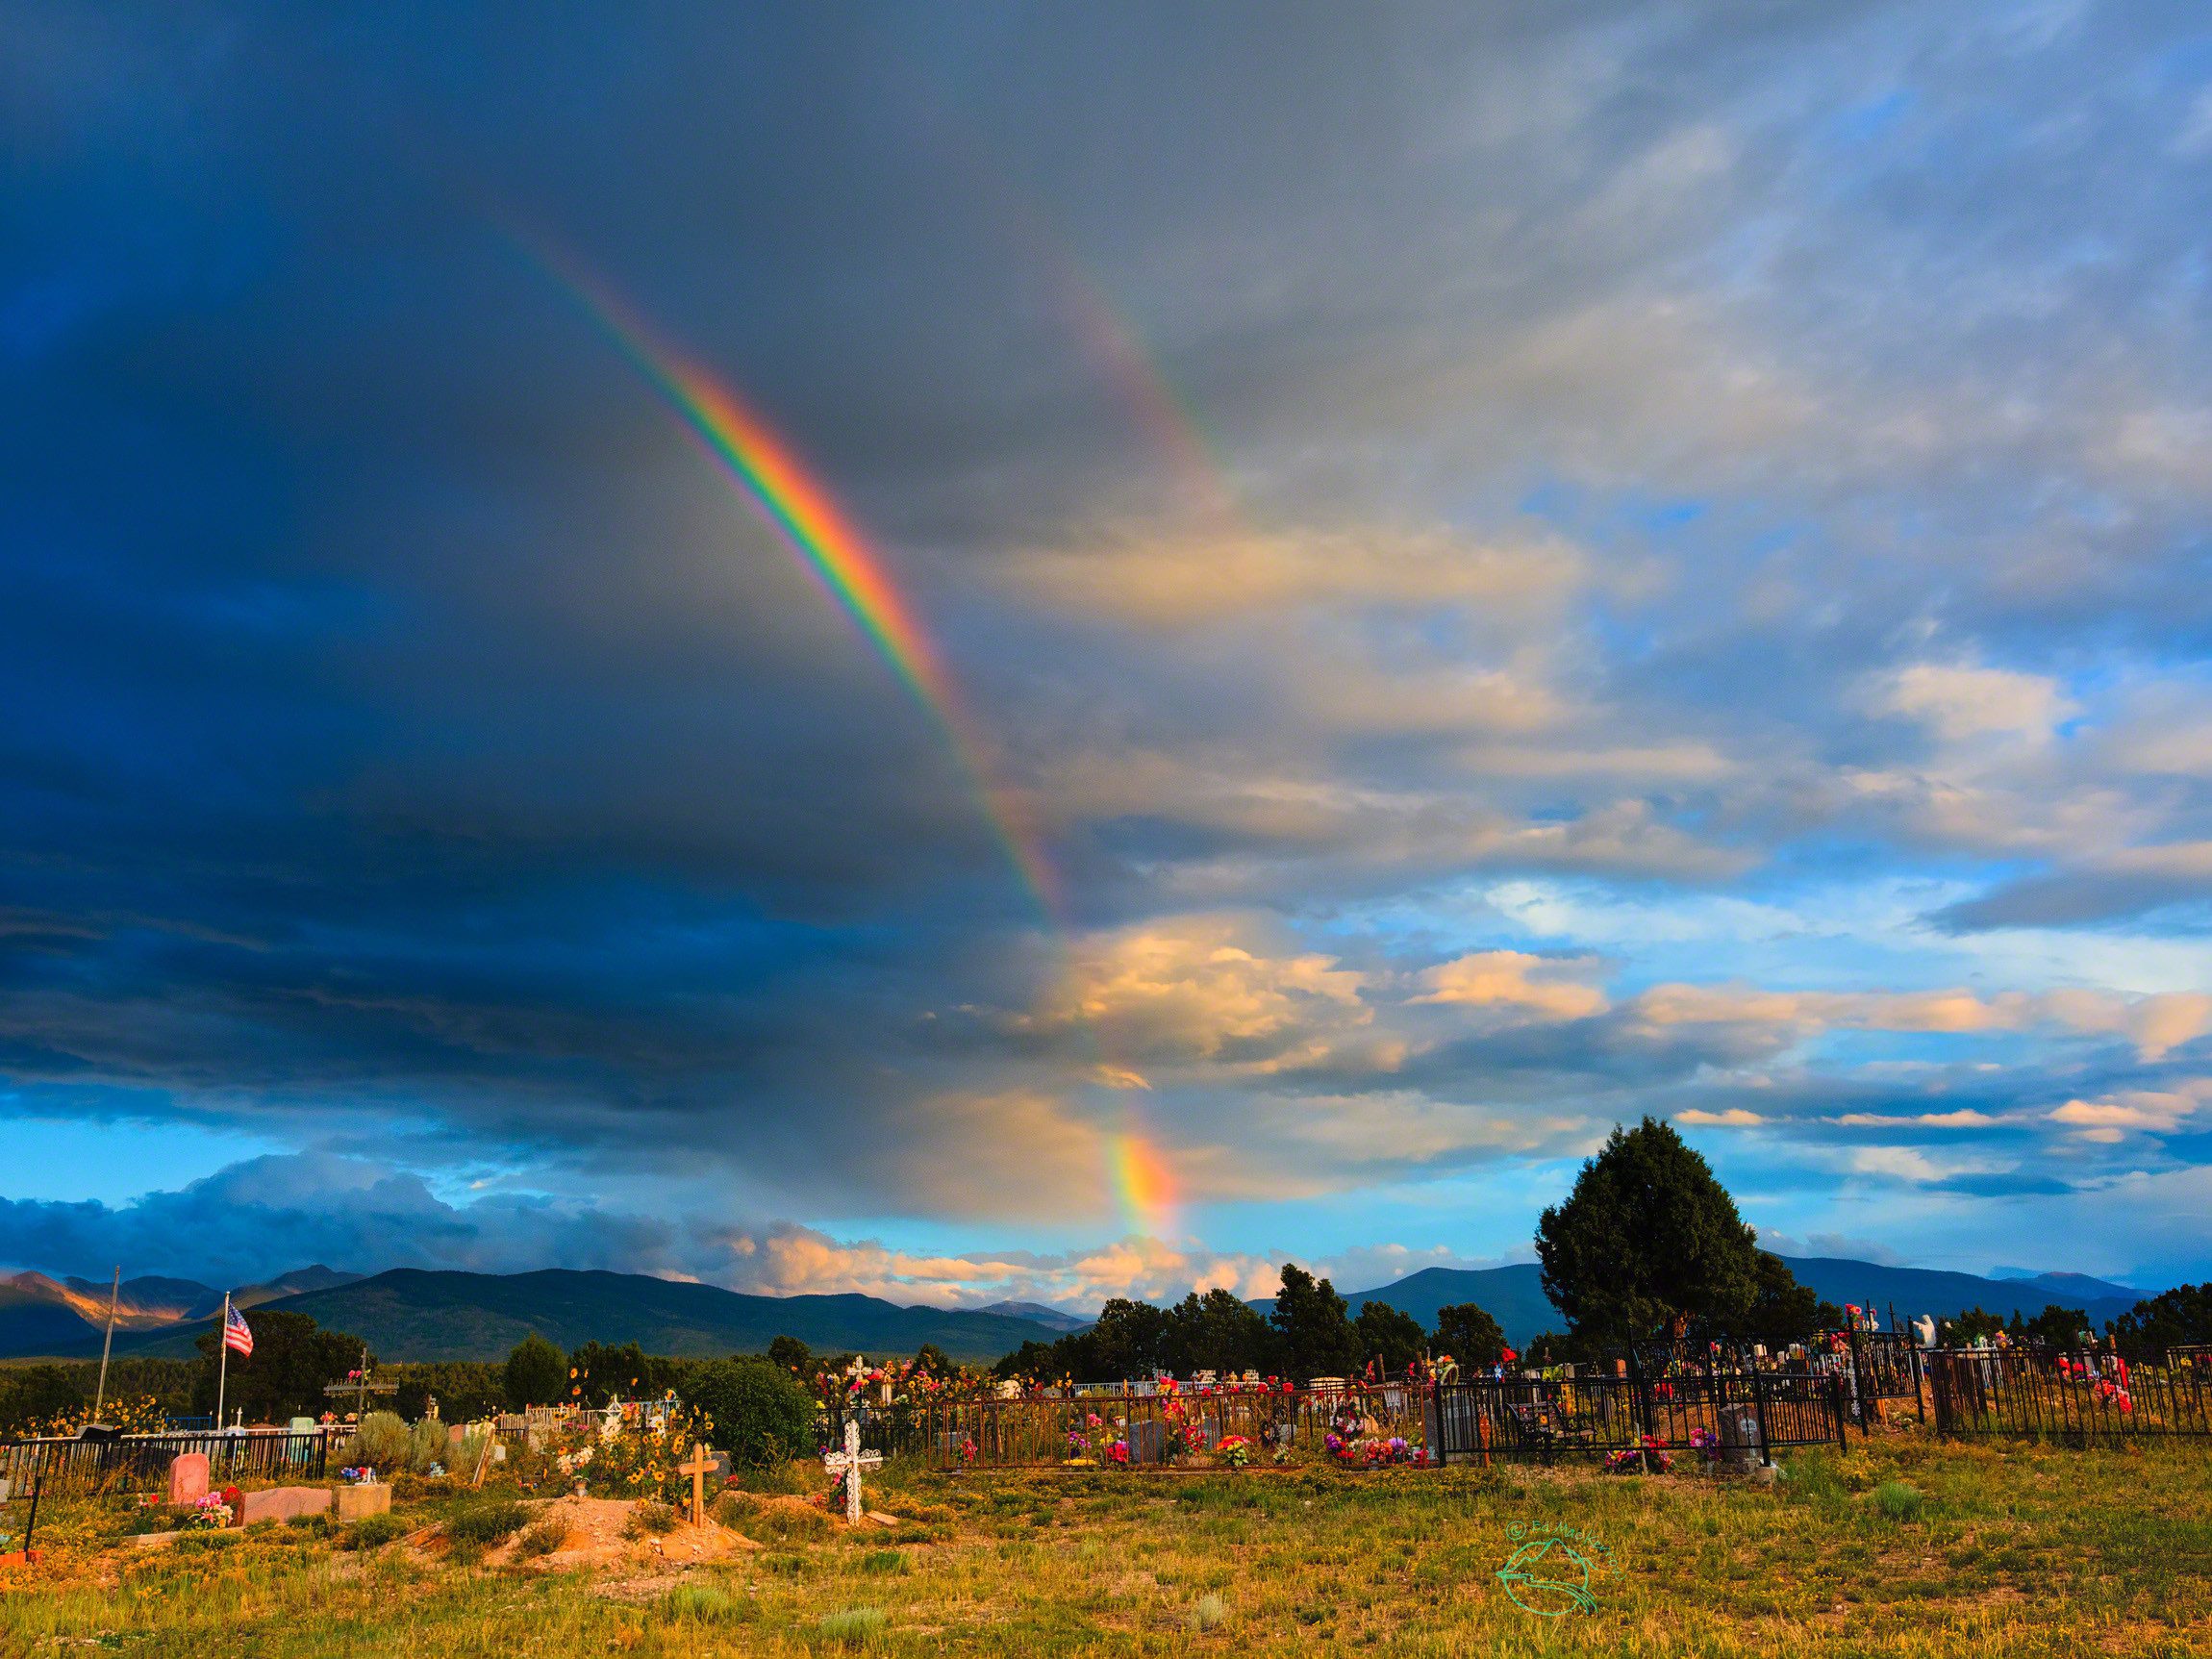 Rainbow over the cemetery at Truchas, New Mexico